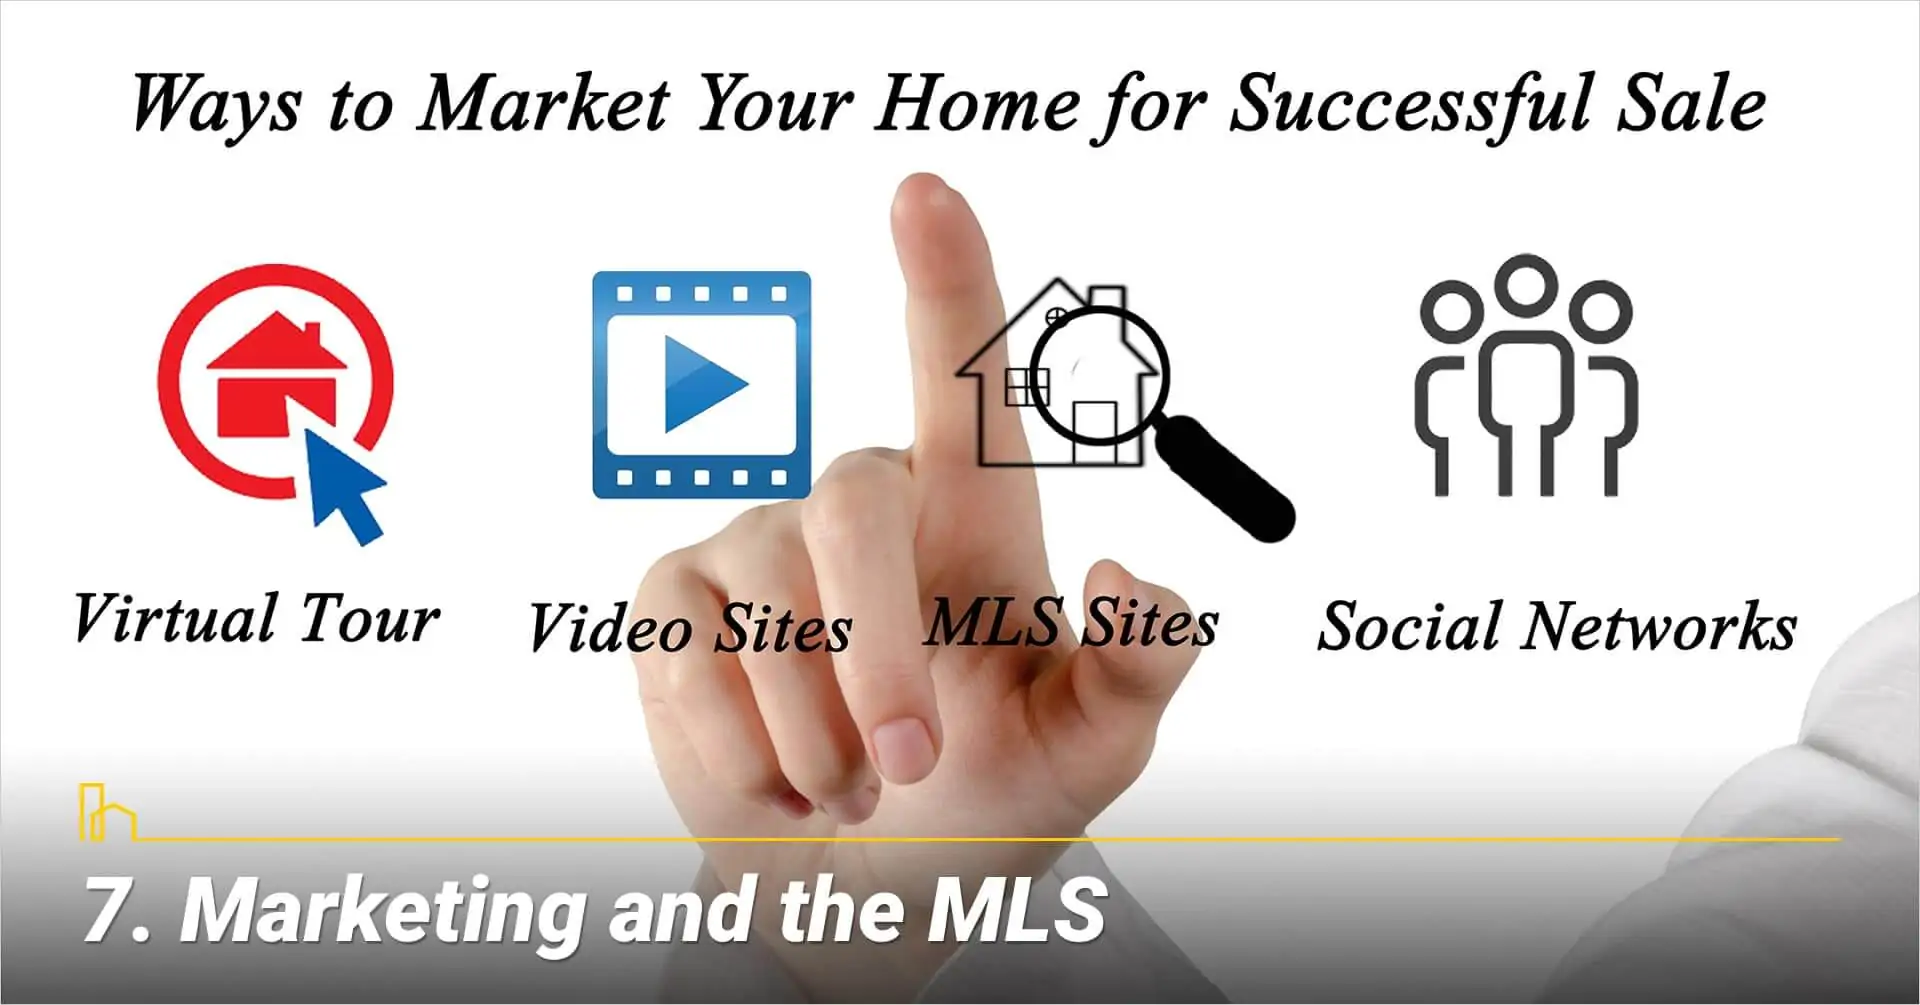 Marketing and the MLS, strategically market your home